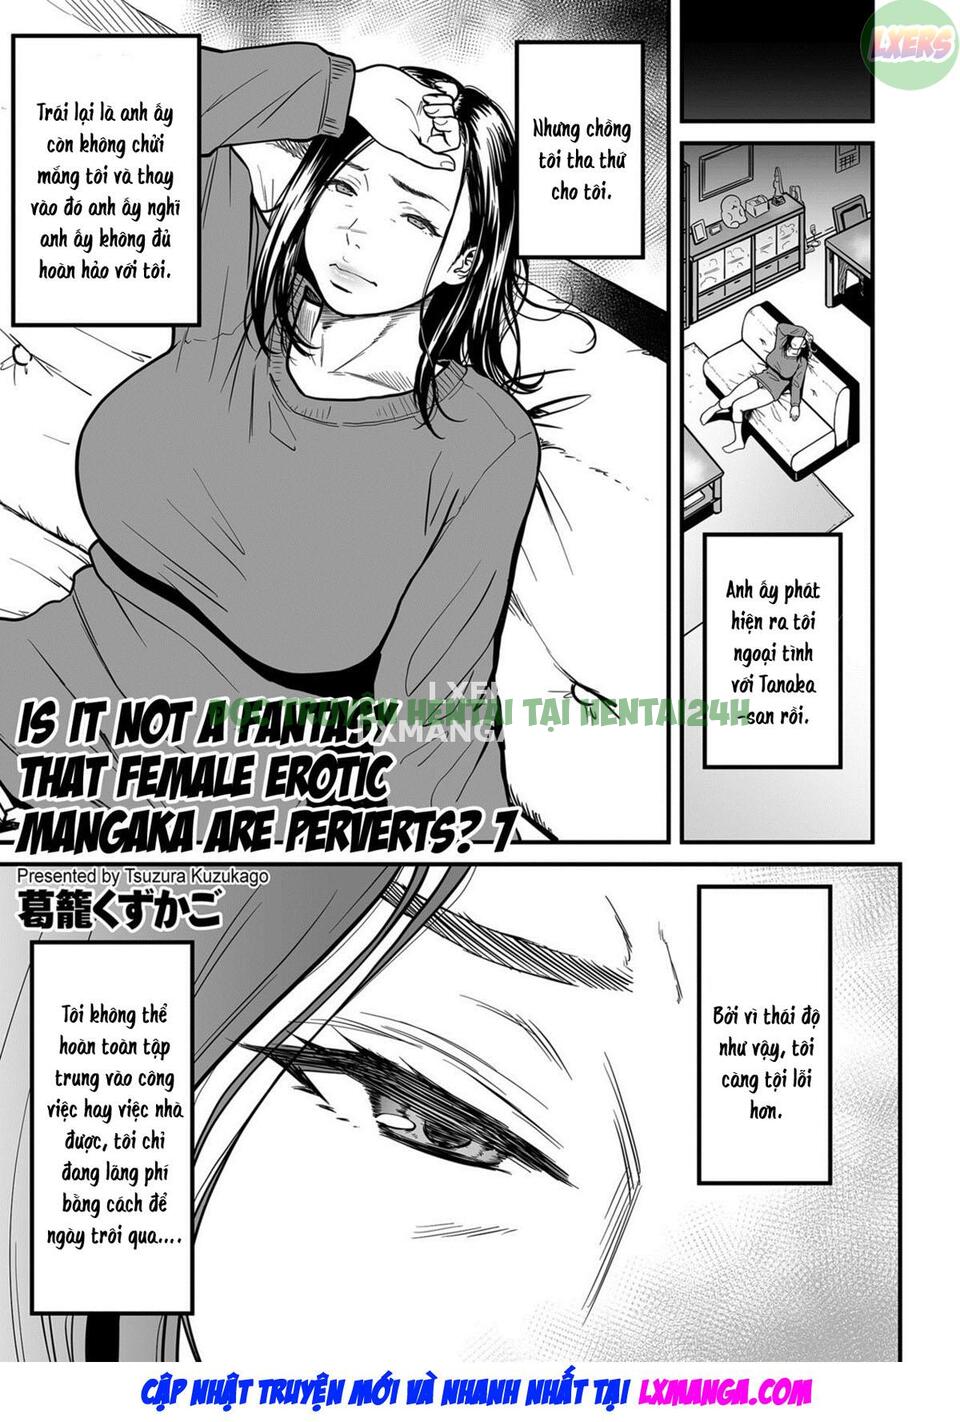 Xem ảnh It’s Not A Fantasy That The Female Erotic Mangaka Is A Pervert - Chapter 7 END - 3 - Hentai24h.Tv